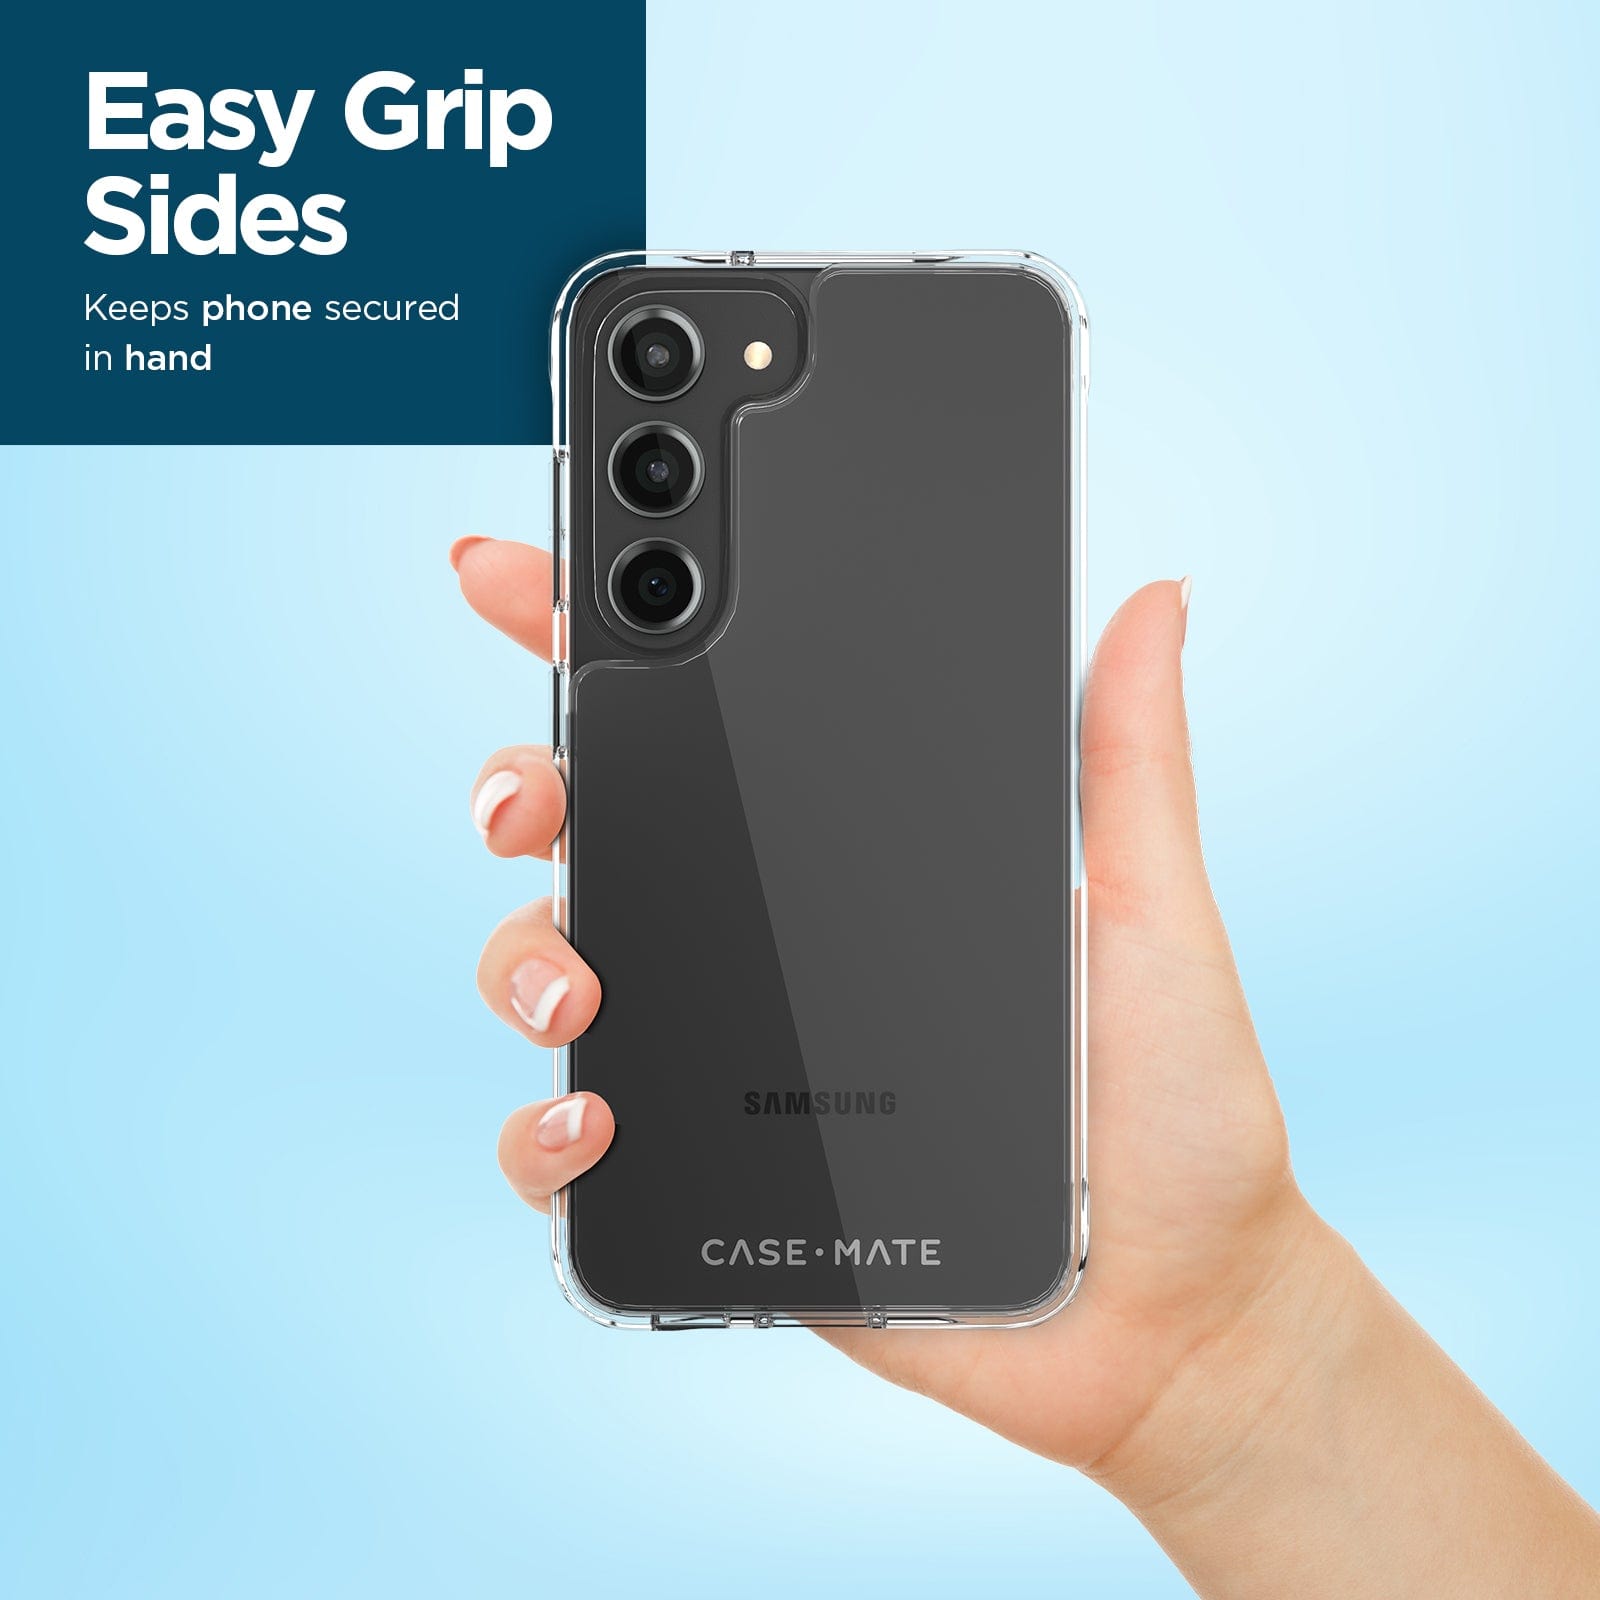 EASY GRIP SIDES. KEEPS PHONE SECURED IN HAND.